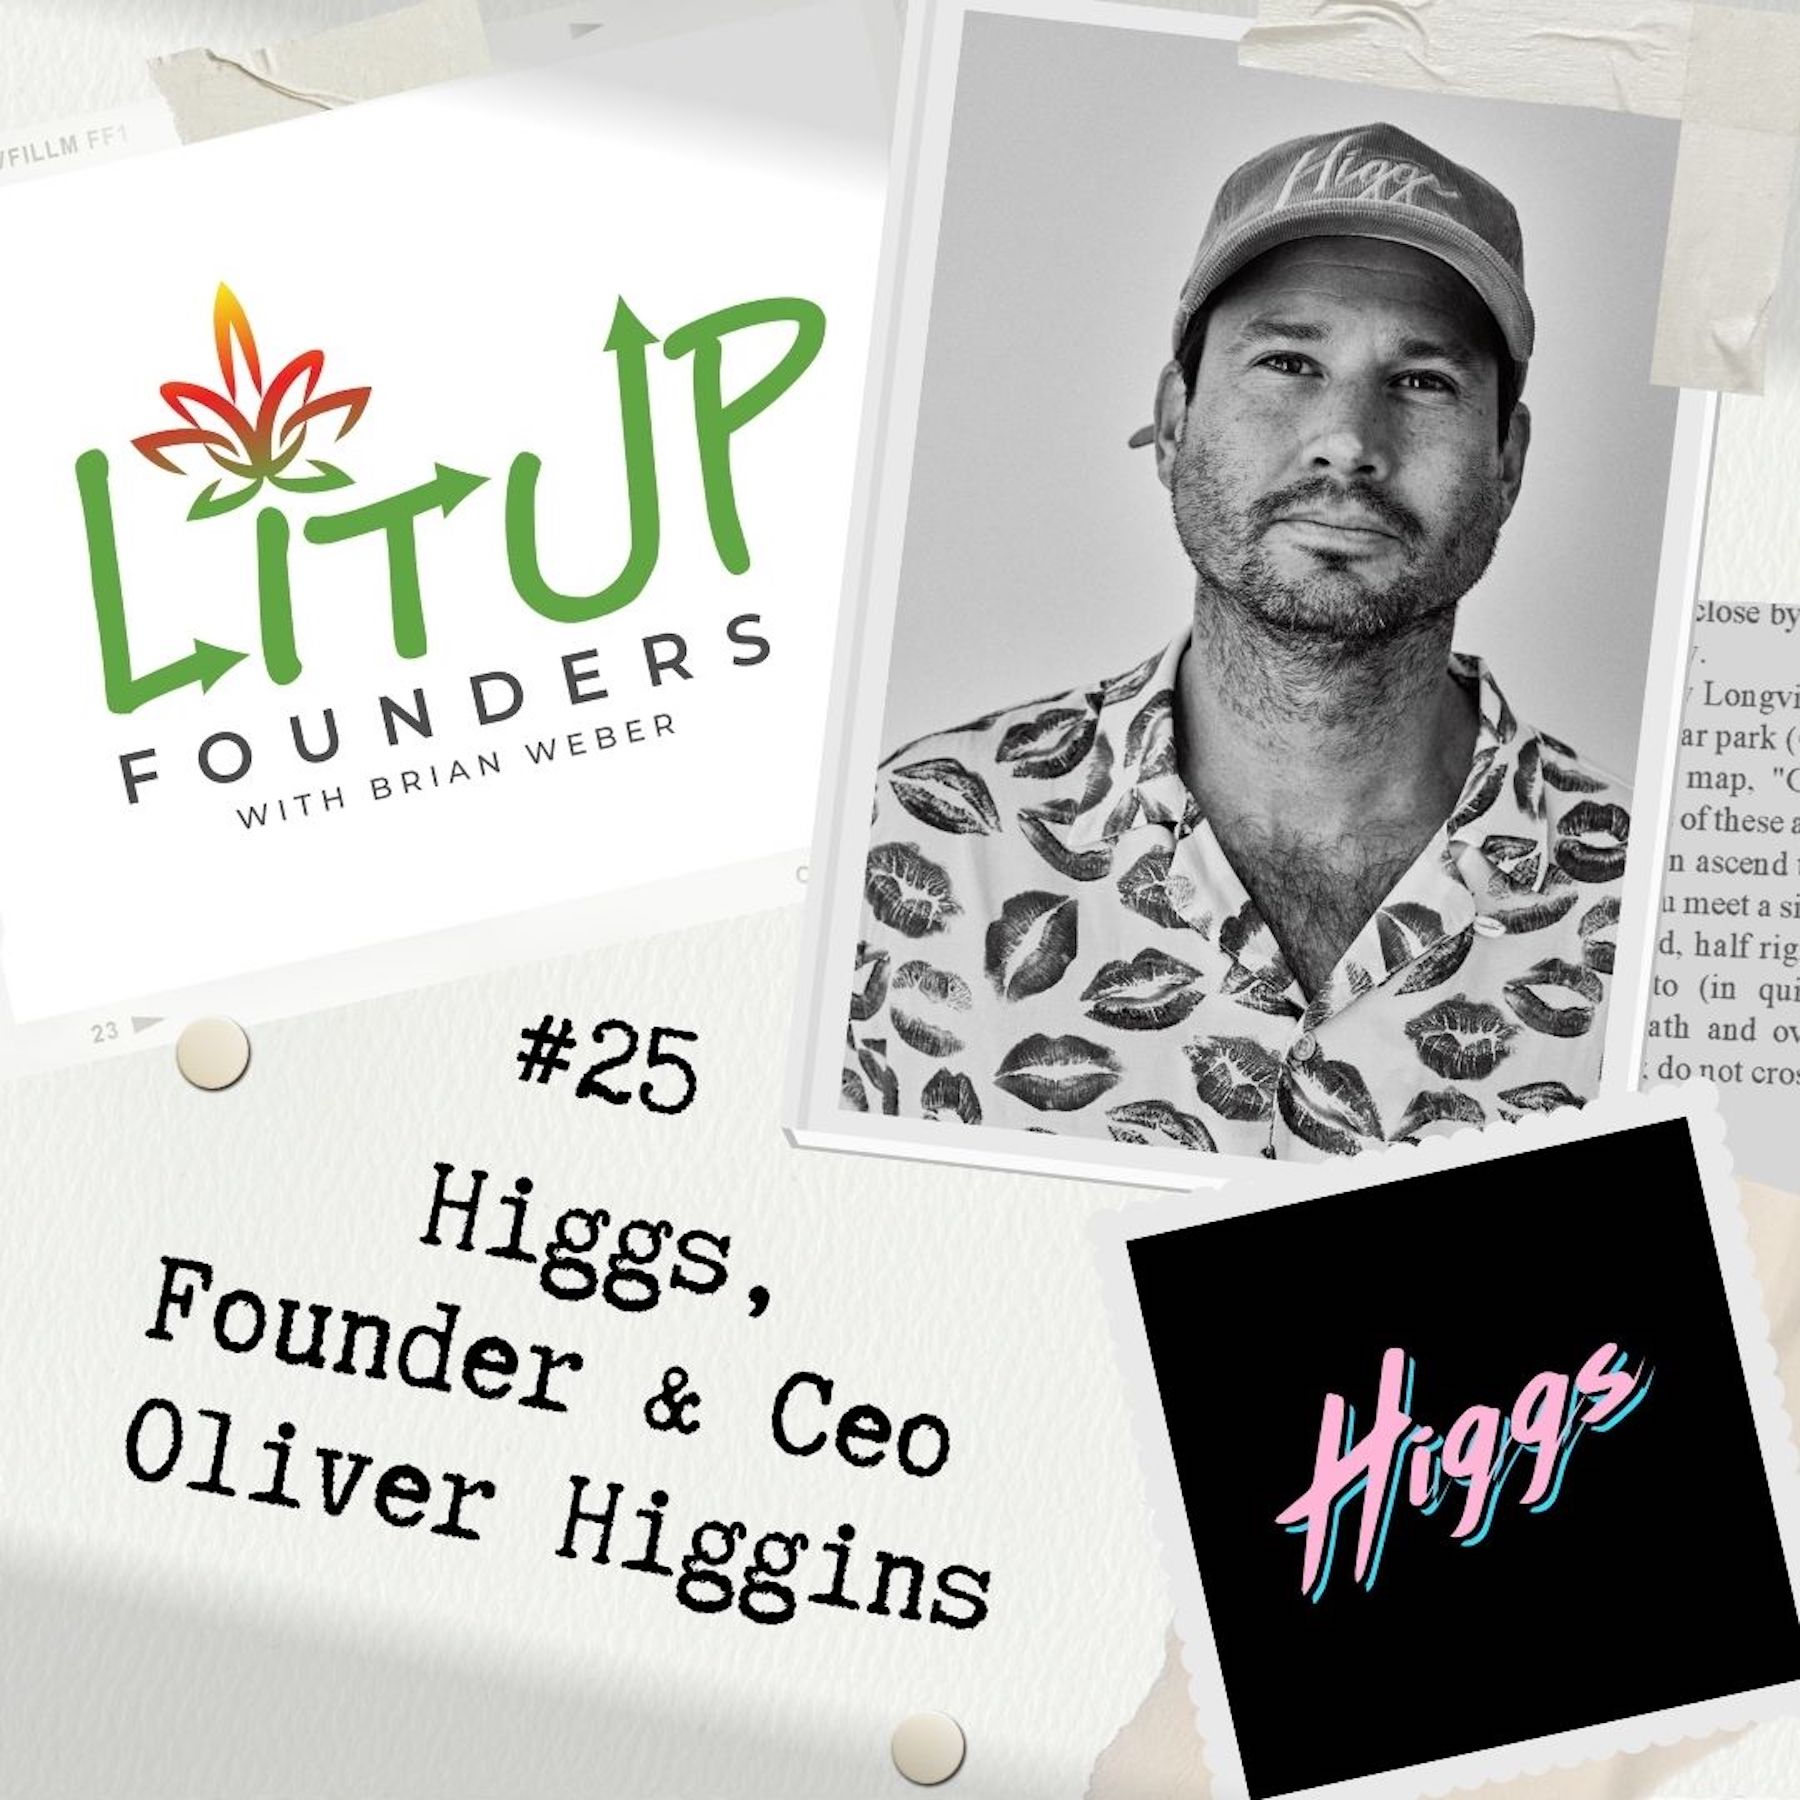 Artwork for podcast Lit Up Founders